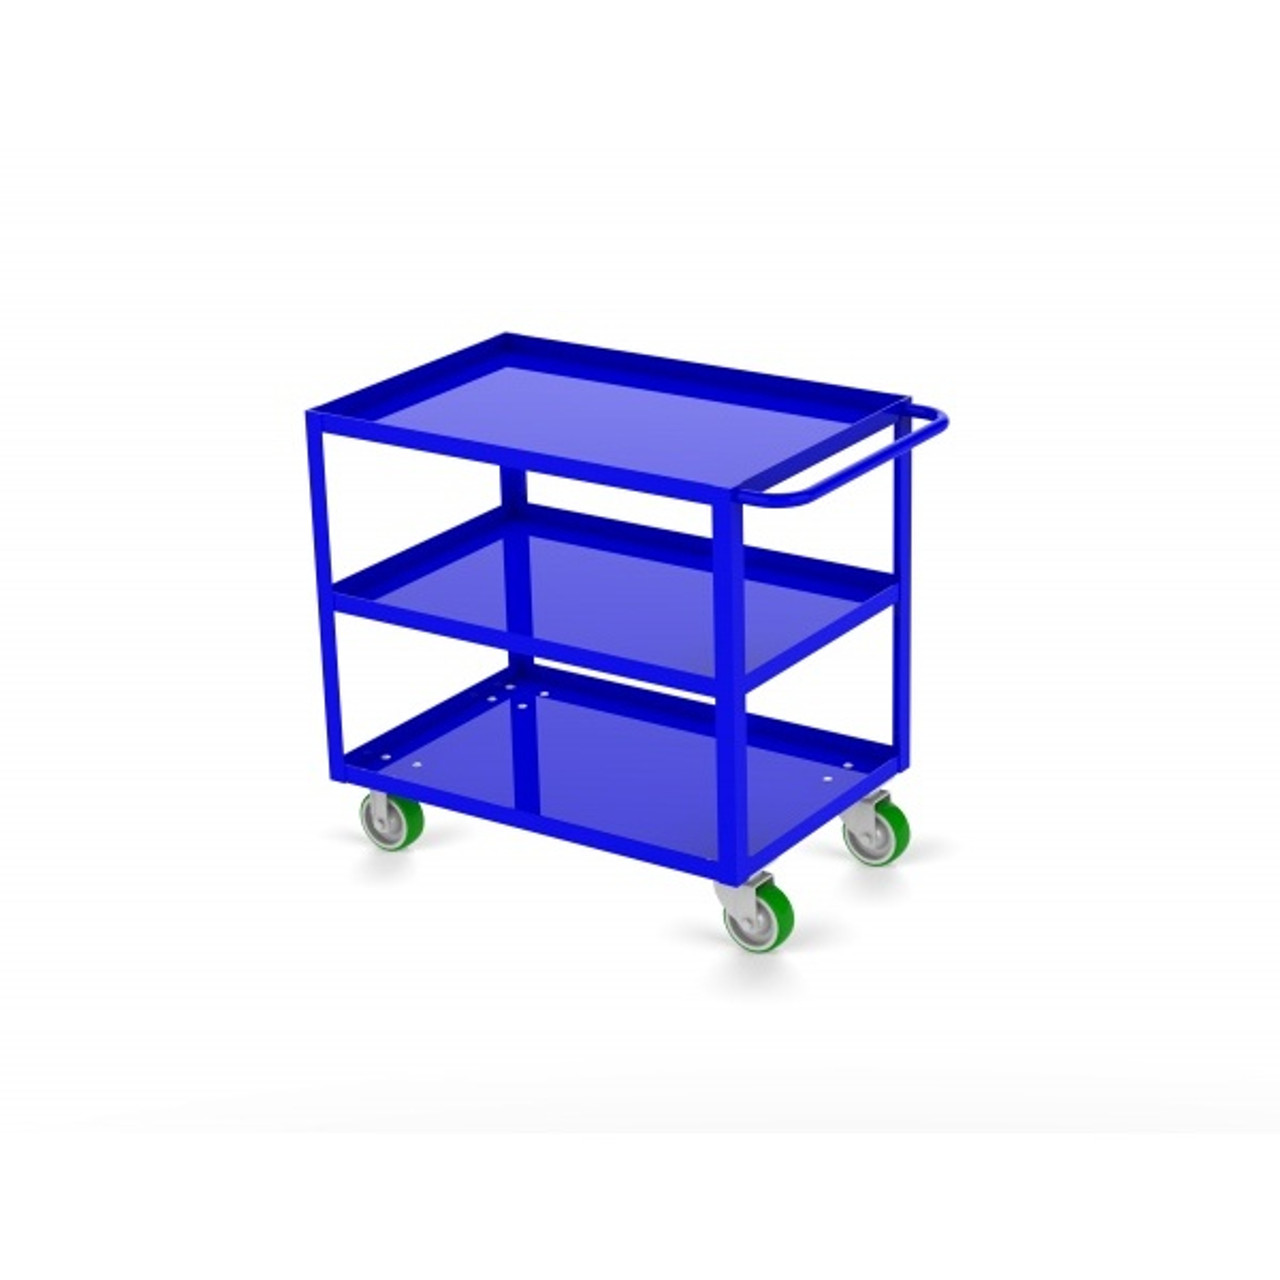 Valley Craft Three Shelf 30 x 60" Utility Cart, Blue with Mold On Casters(CALL FOR BEST PRICING)